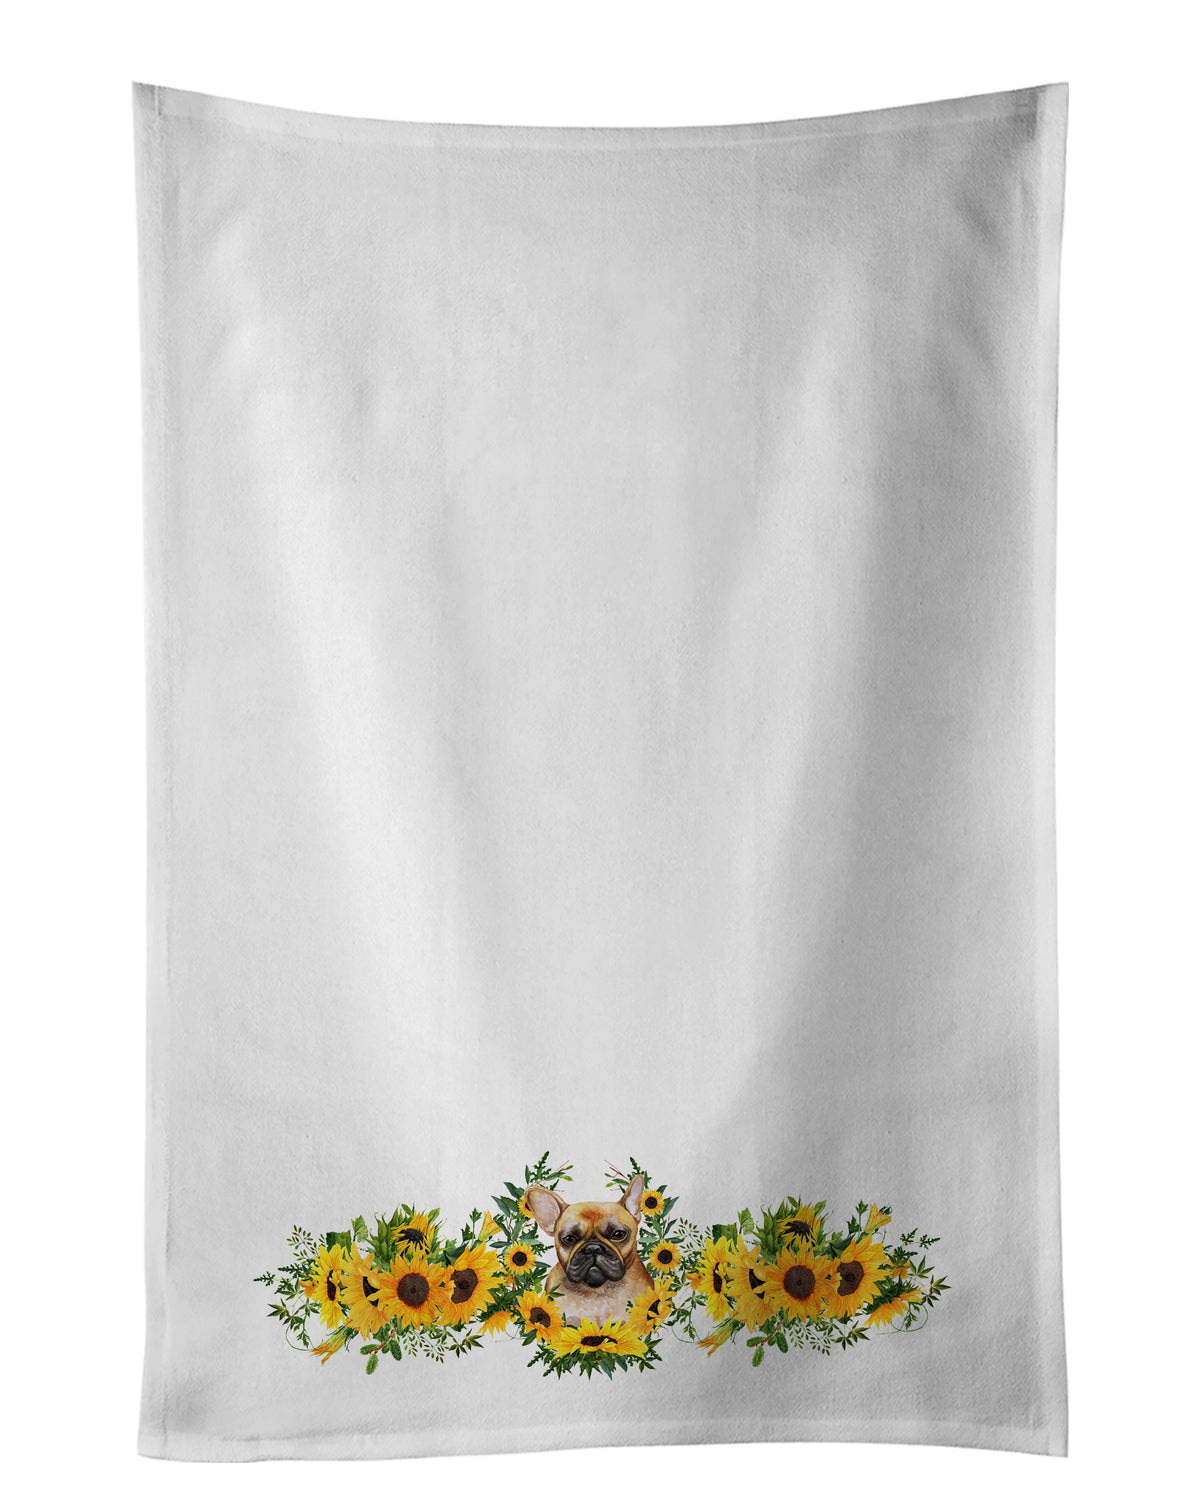 Buy this French Bulldog in Sunflowers White Kitchen Towel Set of 2